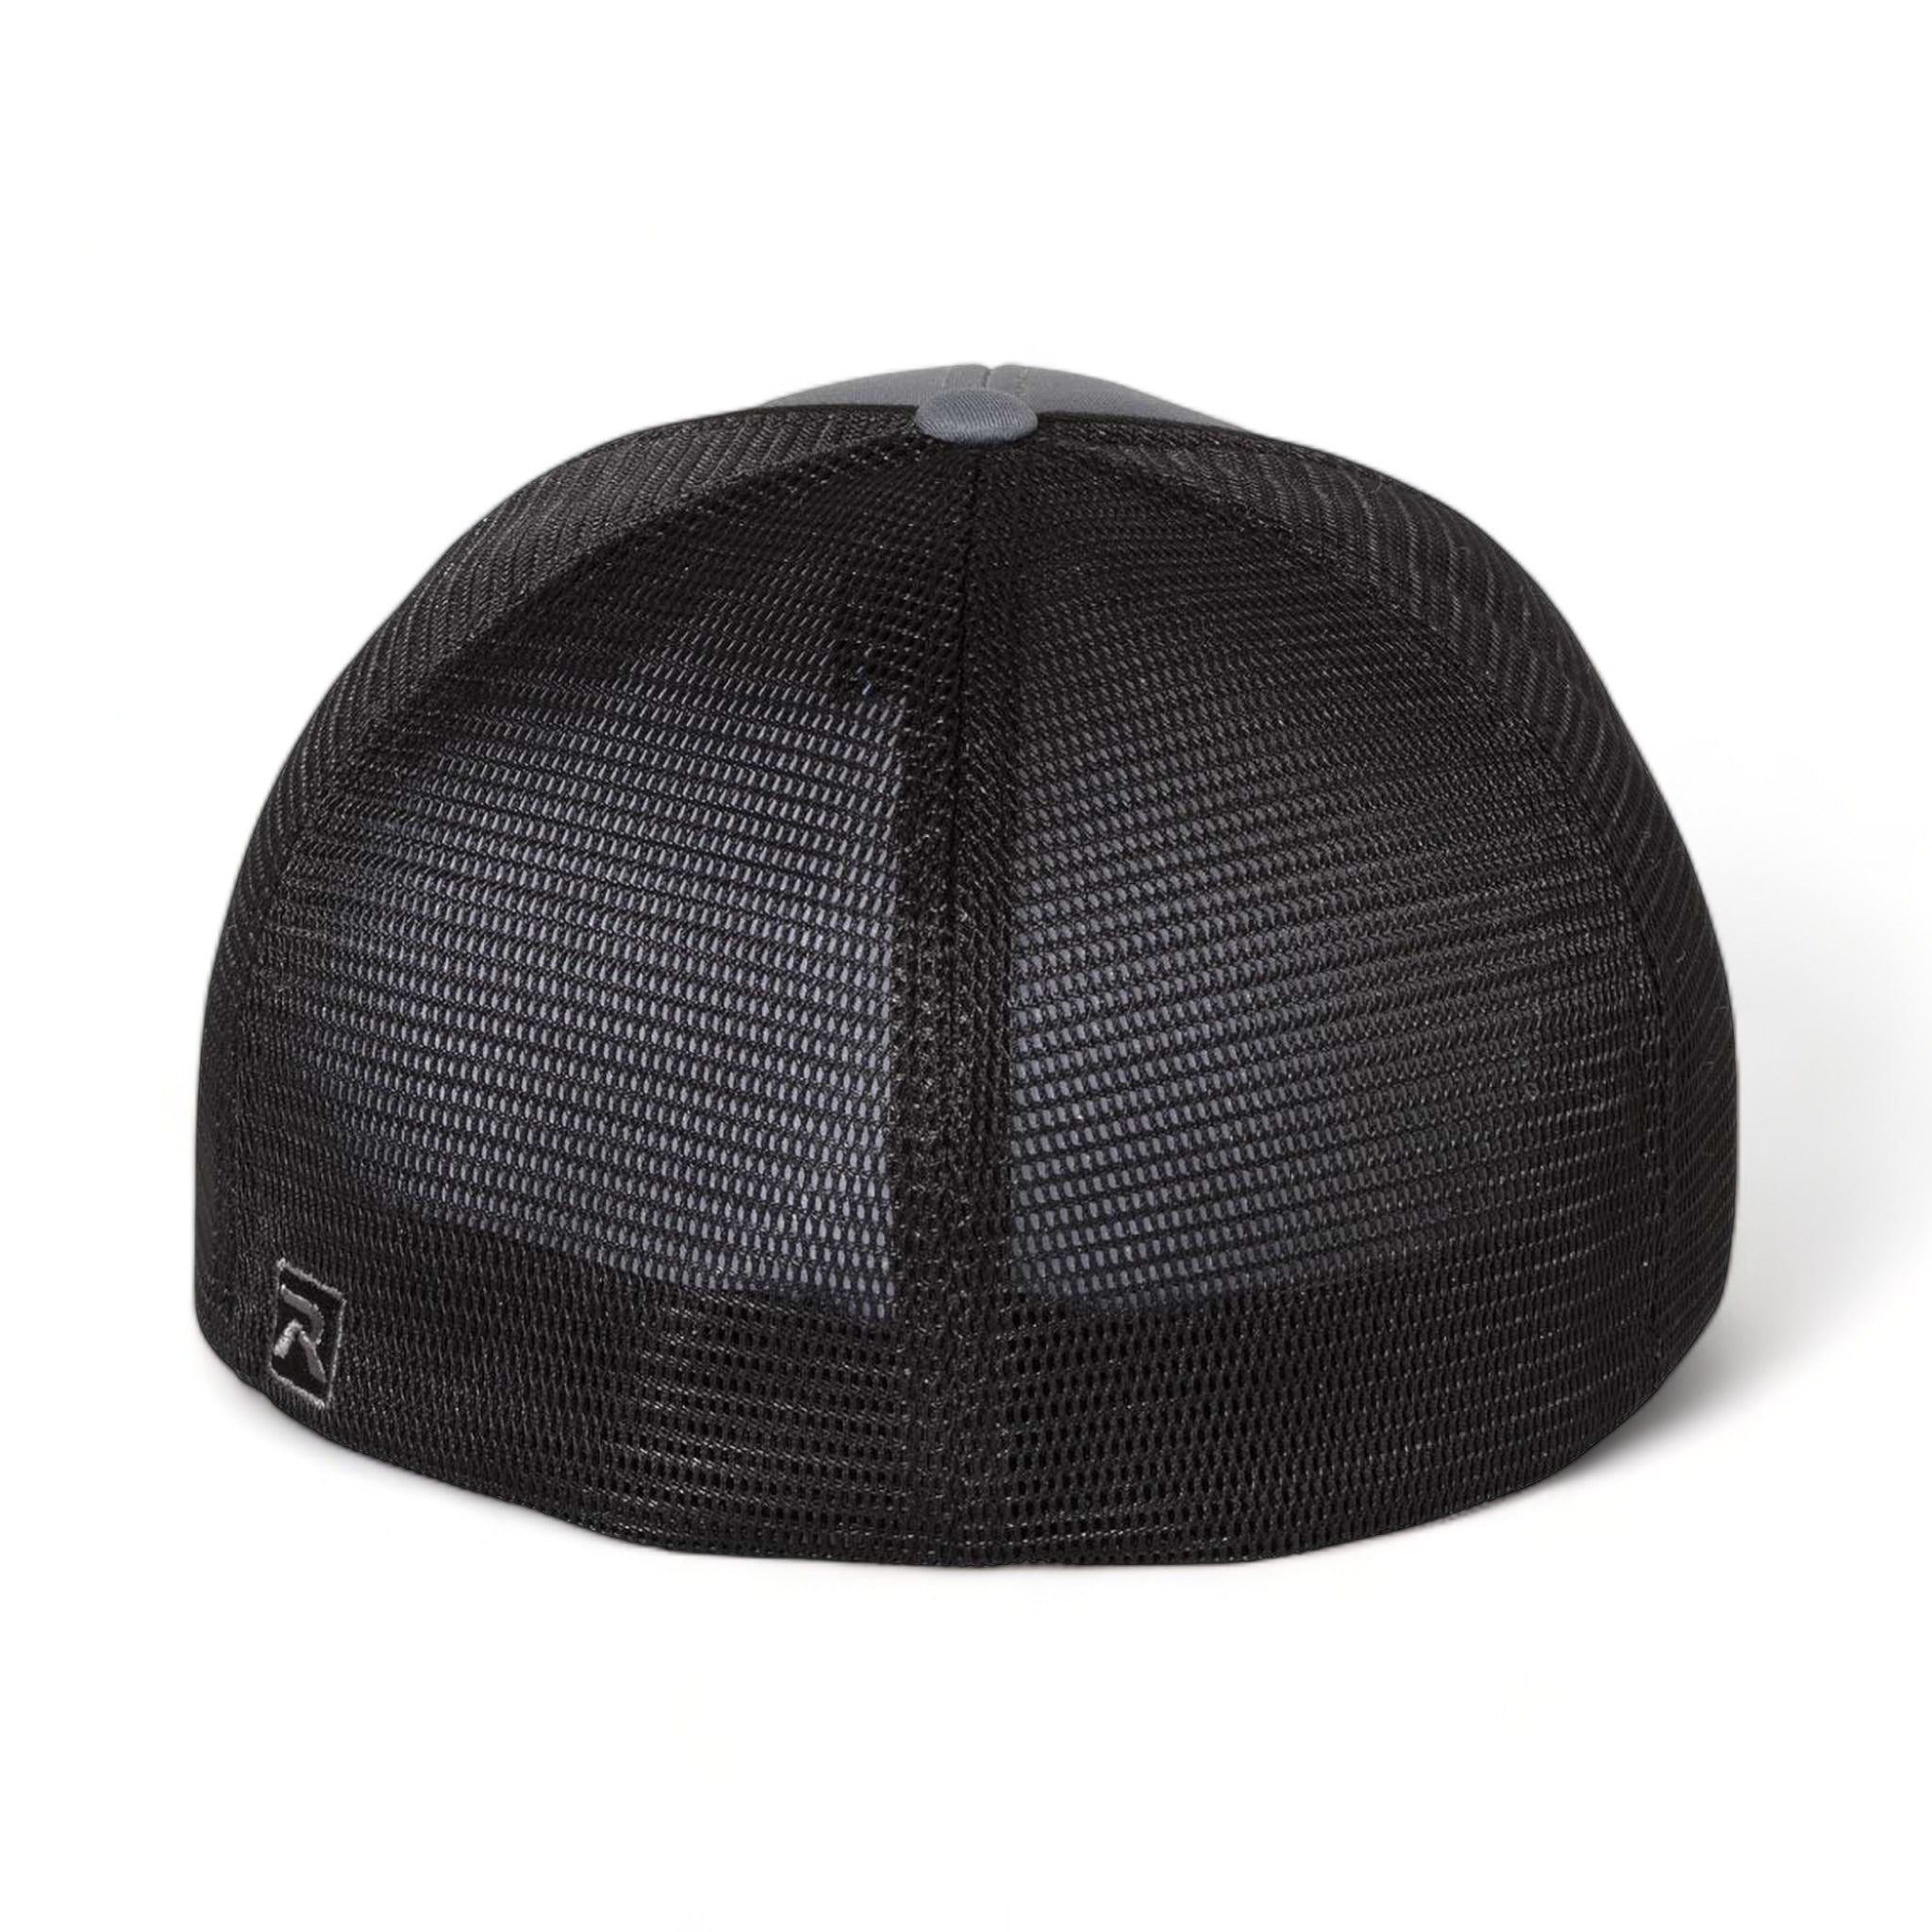 Back view of Richardson 172 custom hat in charcoal and black split